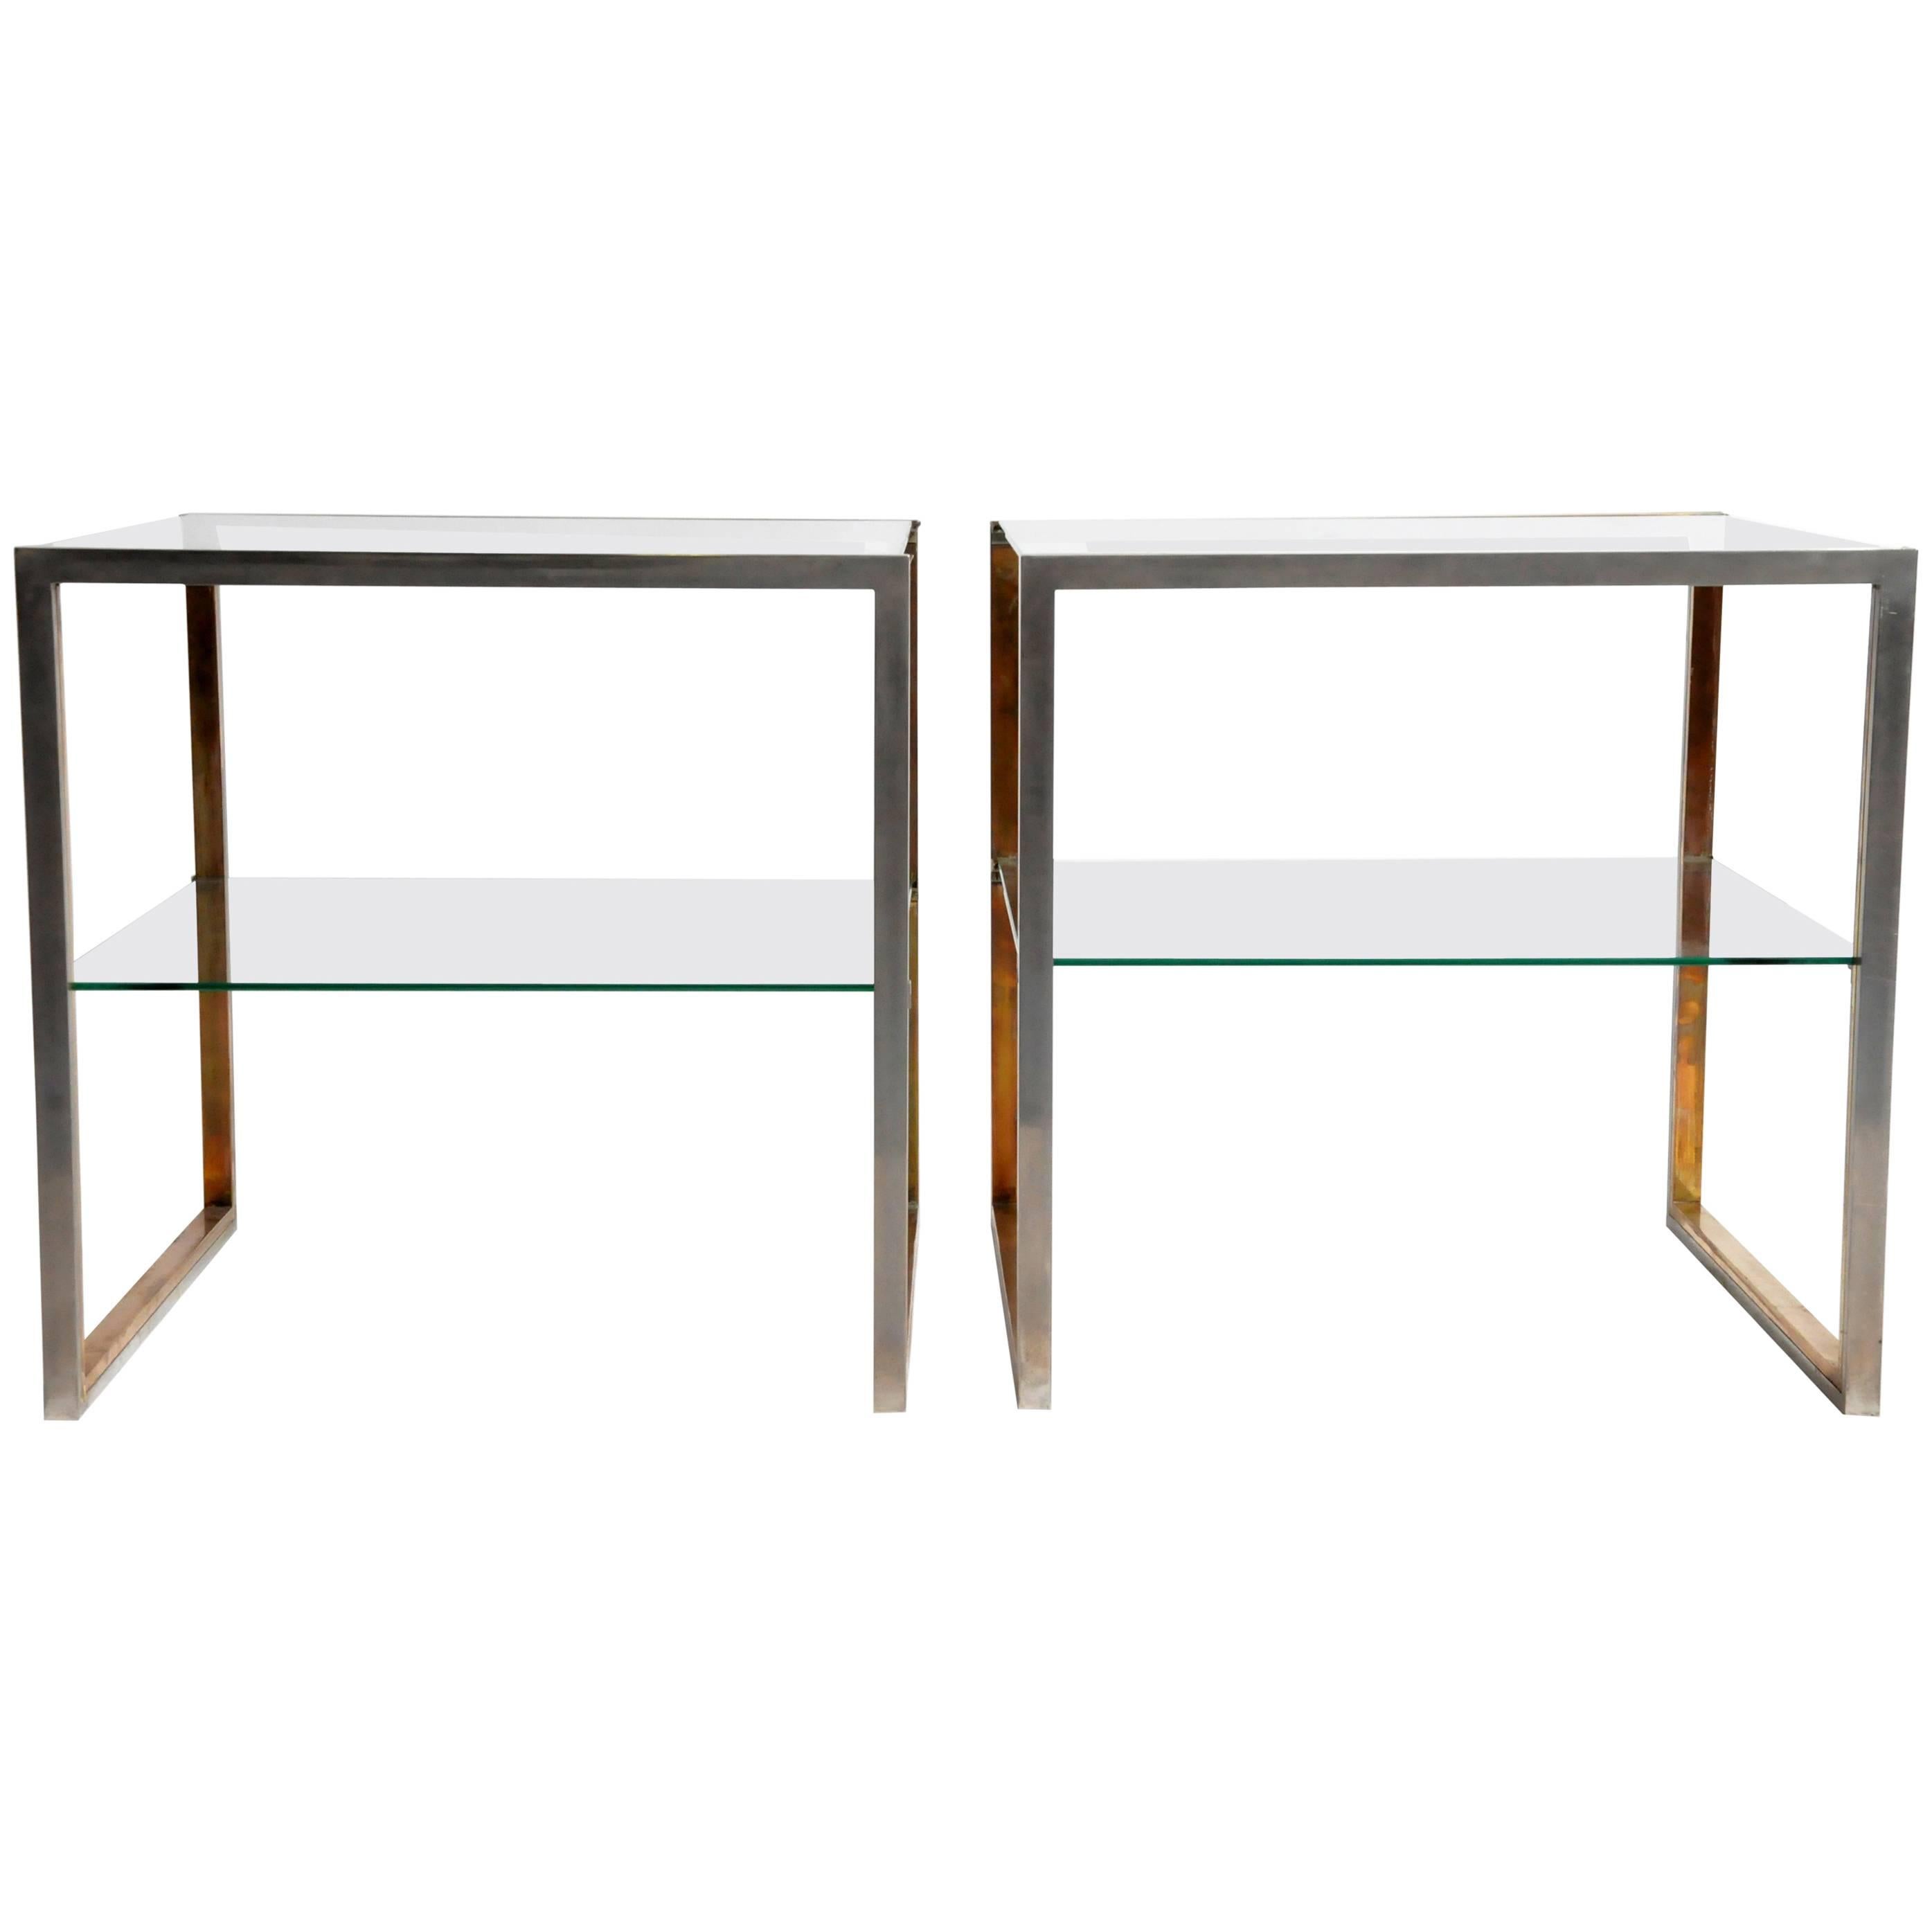 Pair of Brass and Chrome French Side Tables with Glass Shelves